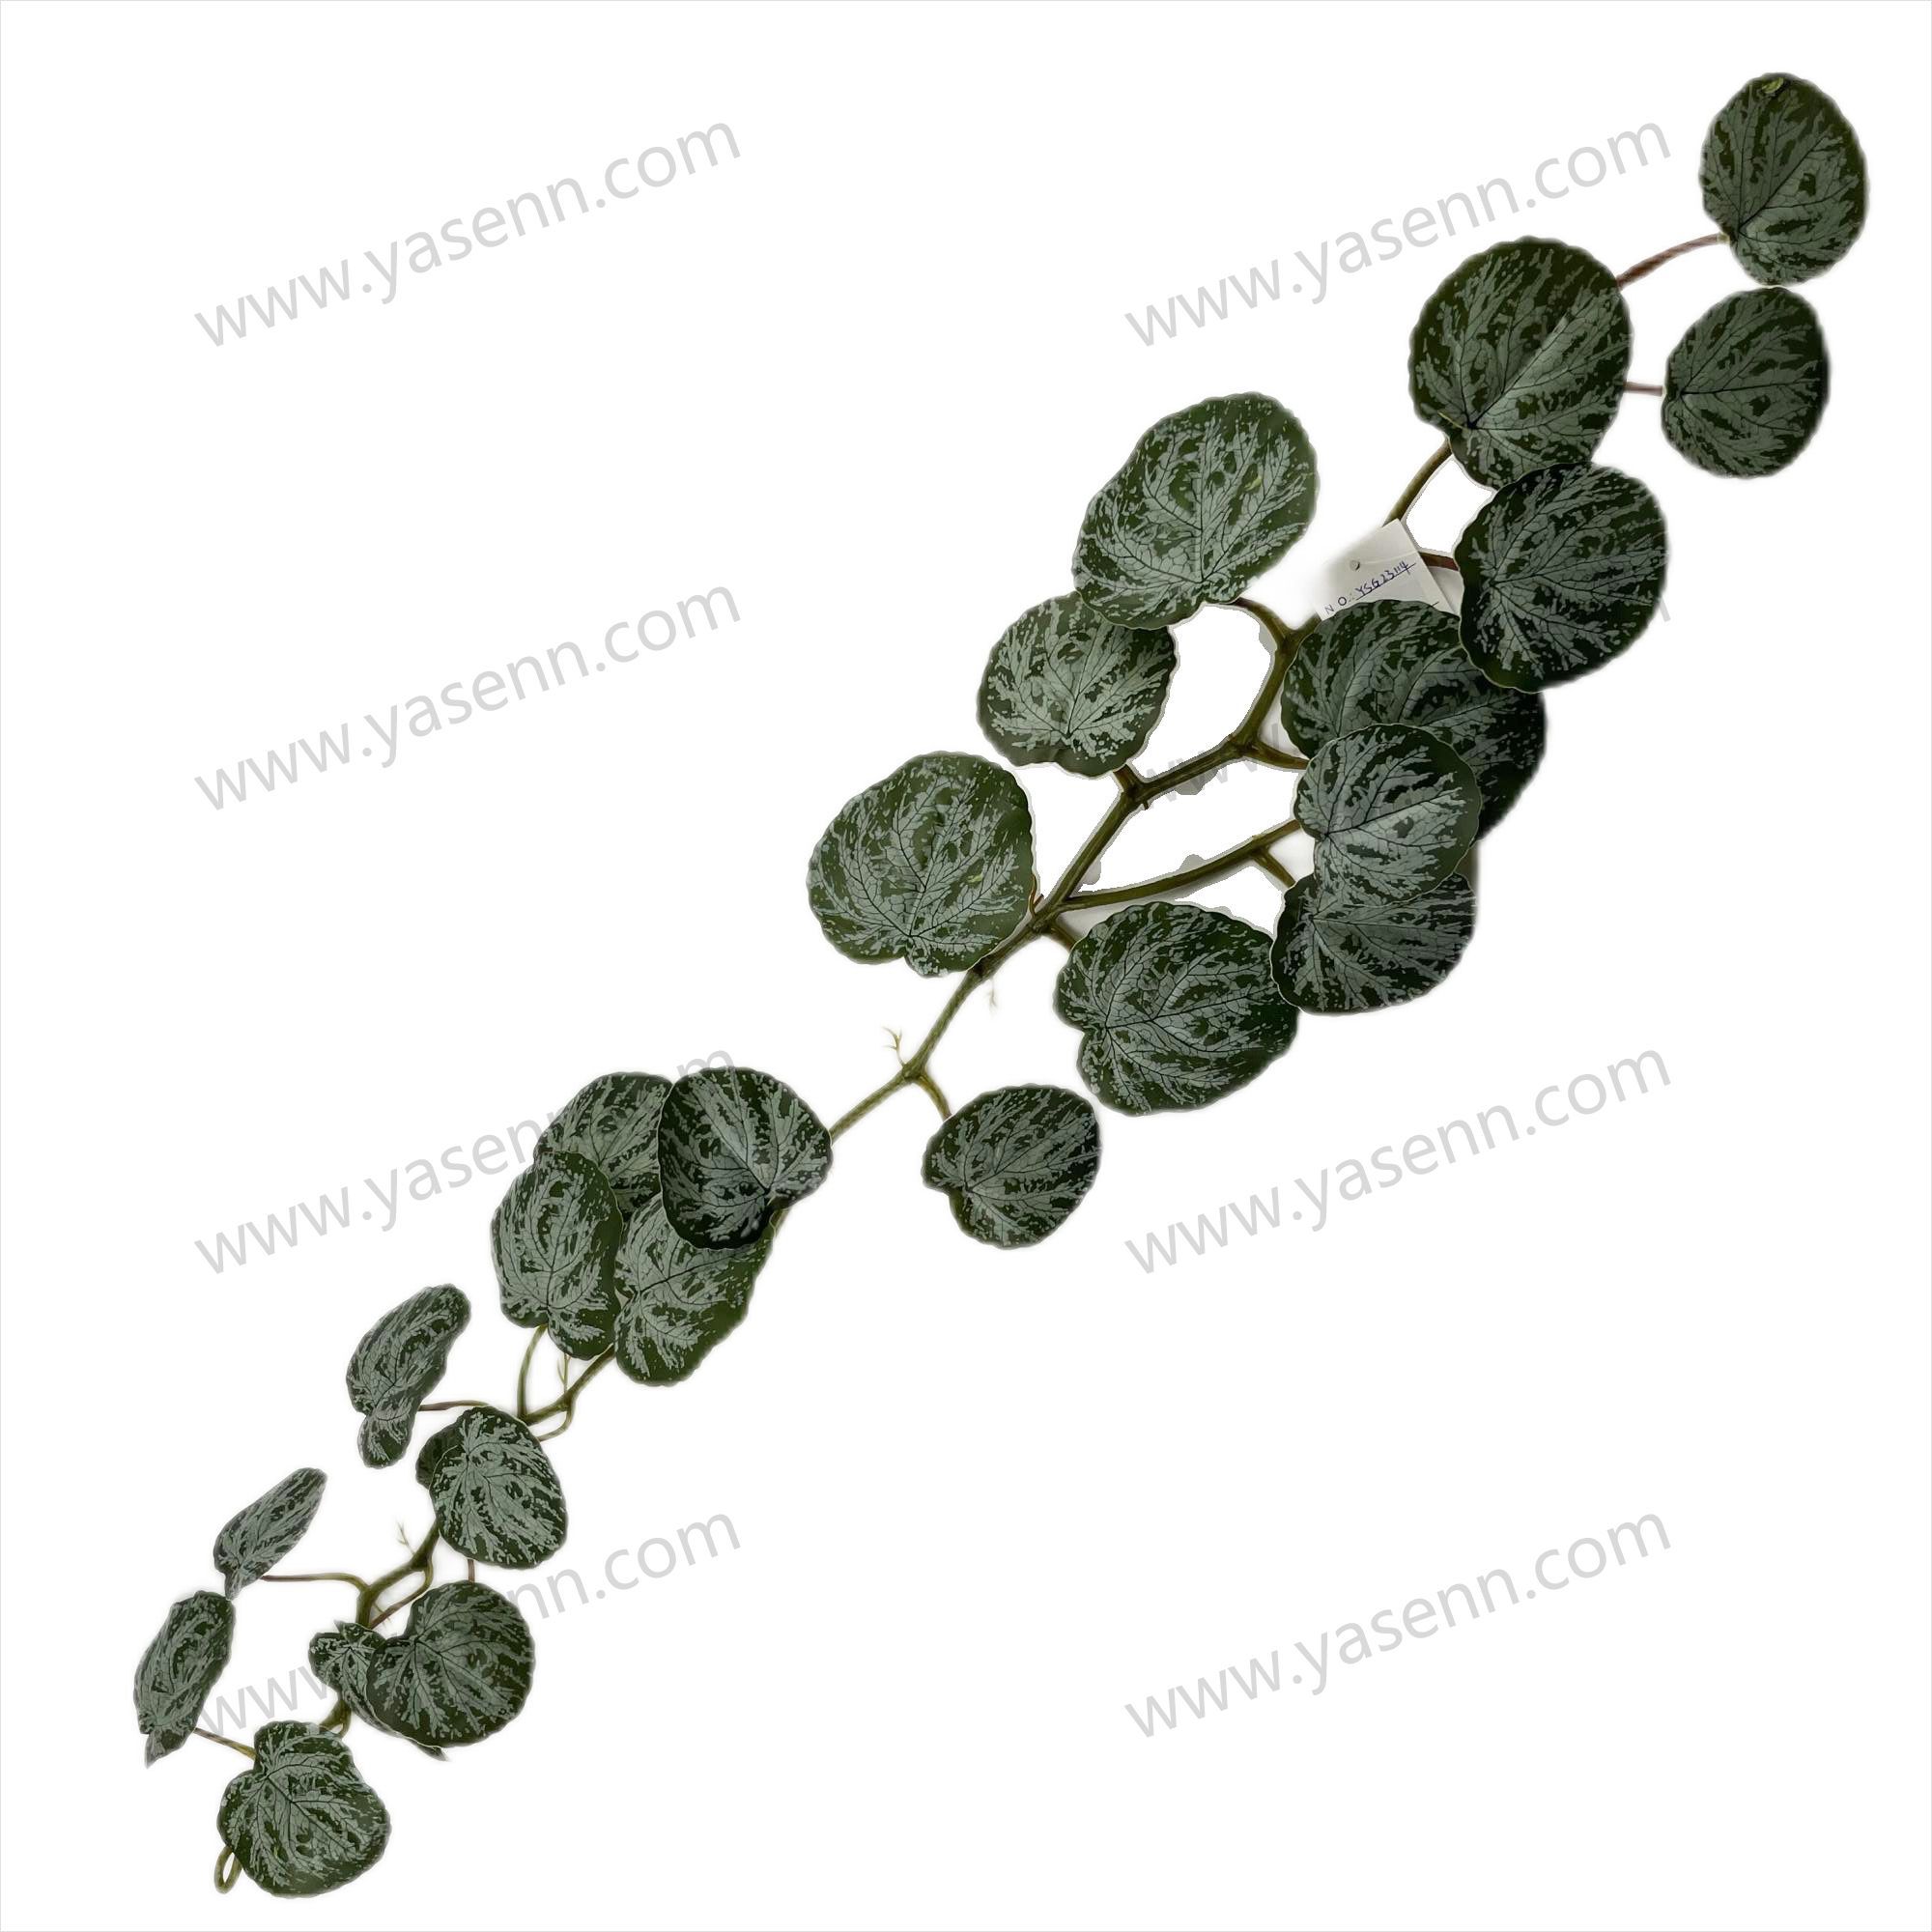 YSG23114 HEIGHT  130CM/ BEGONIA LEAF  LEAVES/ 2 SECTIONS/ RUBBERIZED FABRIC/25  LEAVES 